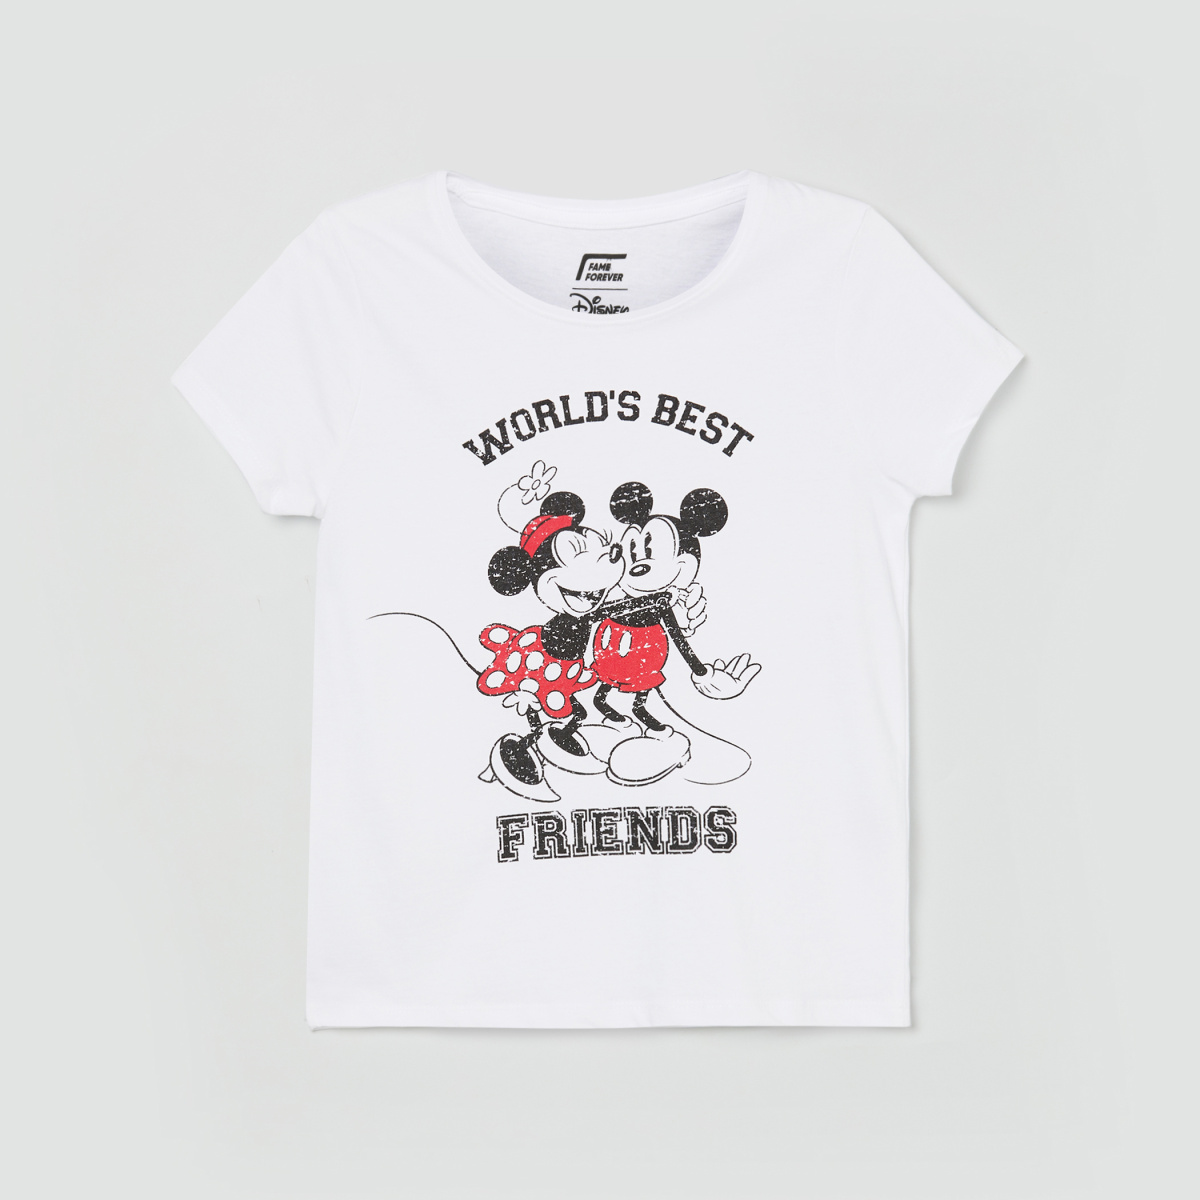 FAME FOREVER YOUNG Girls Printed Round Neck T-shirt